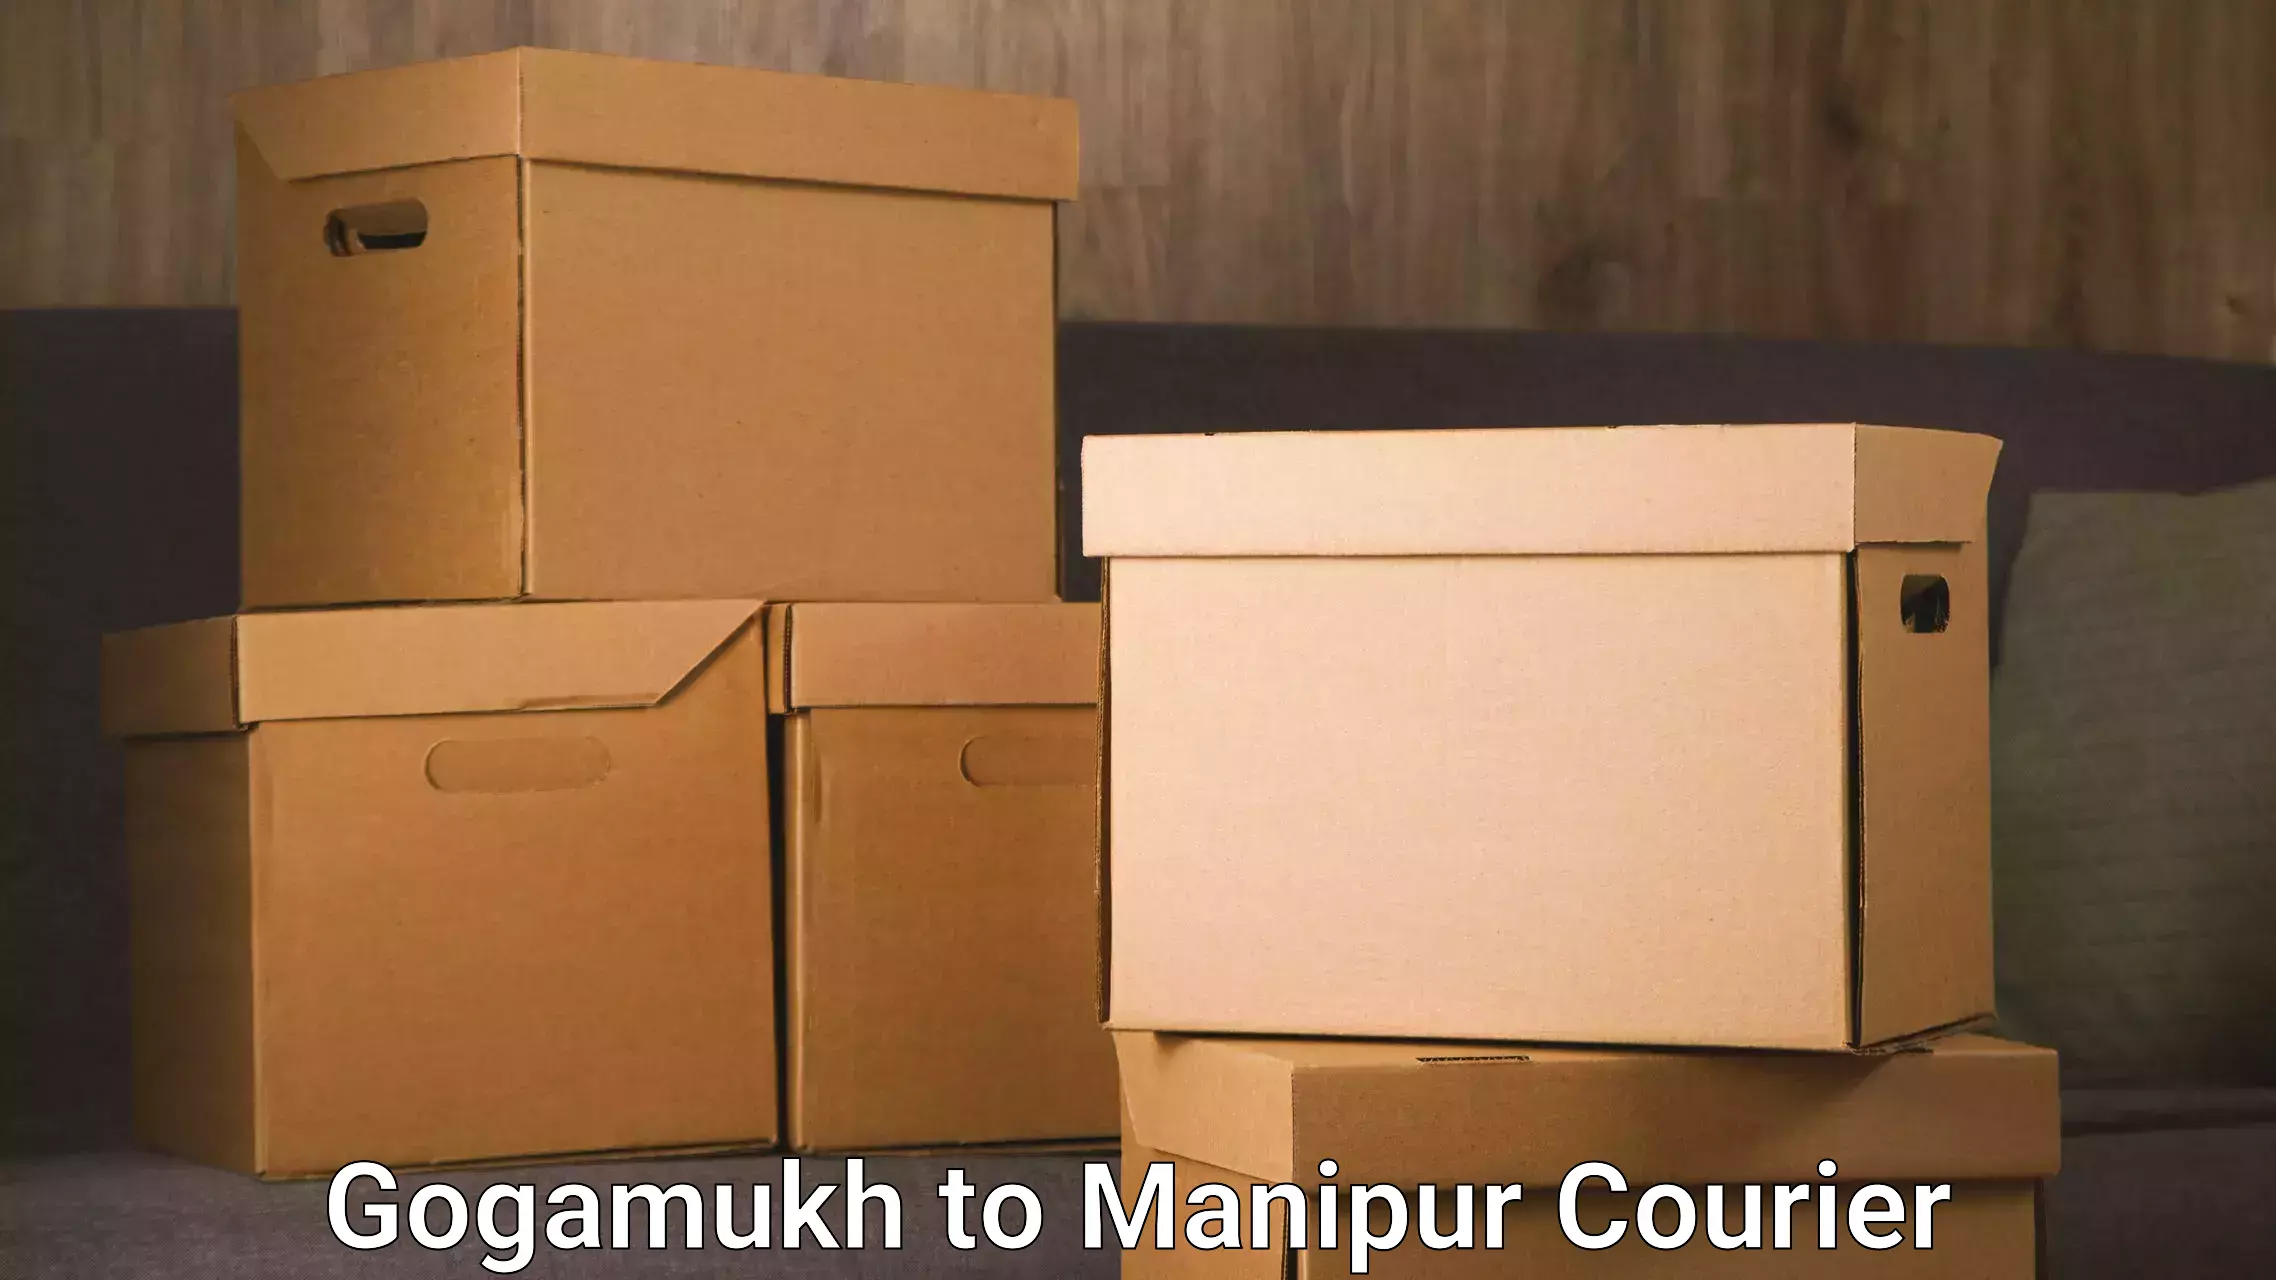 End-to-end delivery in Gogamukh to Manipur